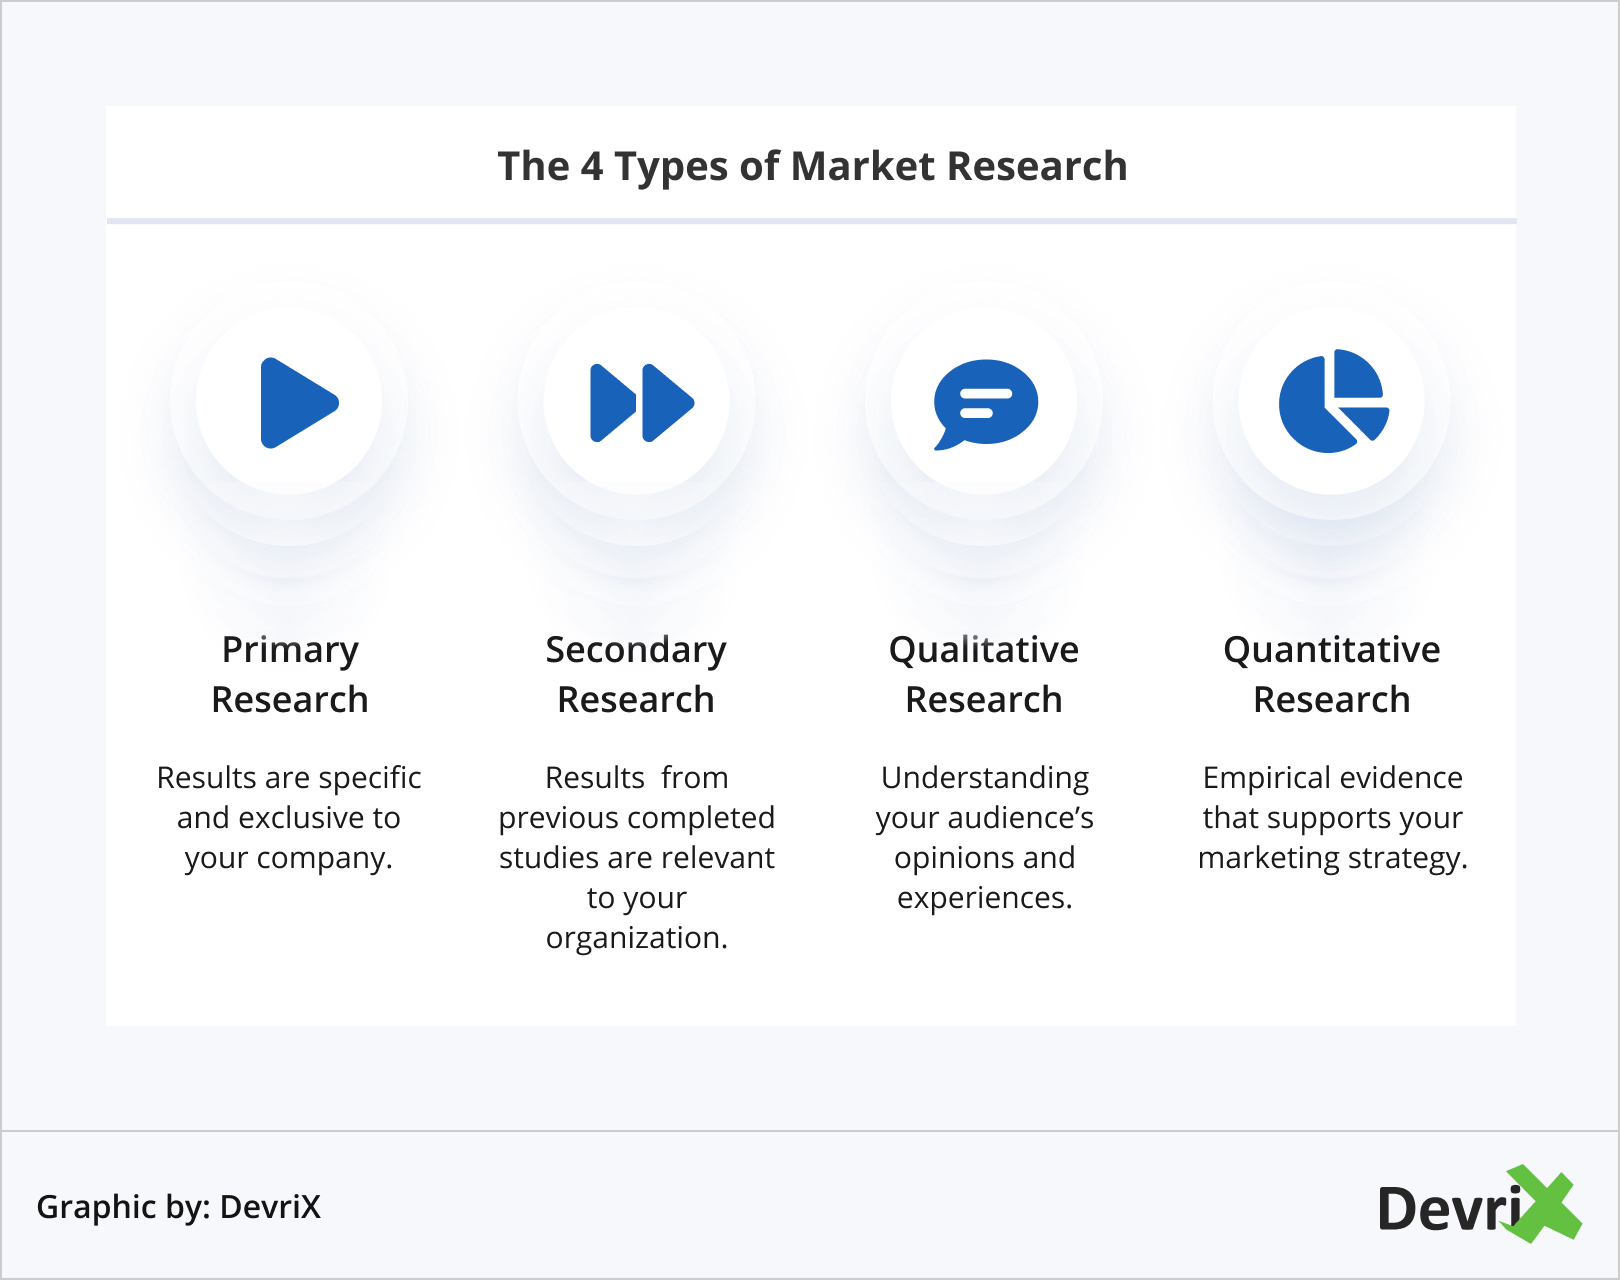 The 4 Types of Market Research